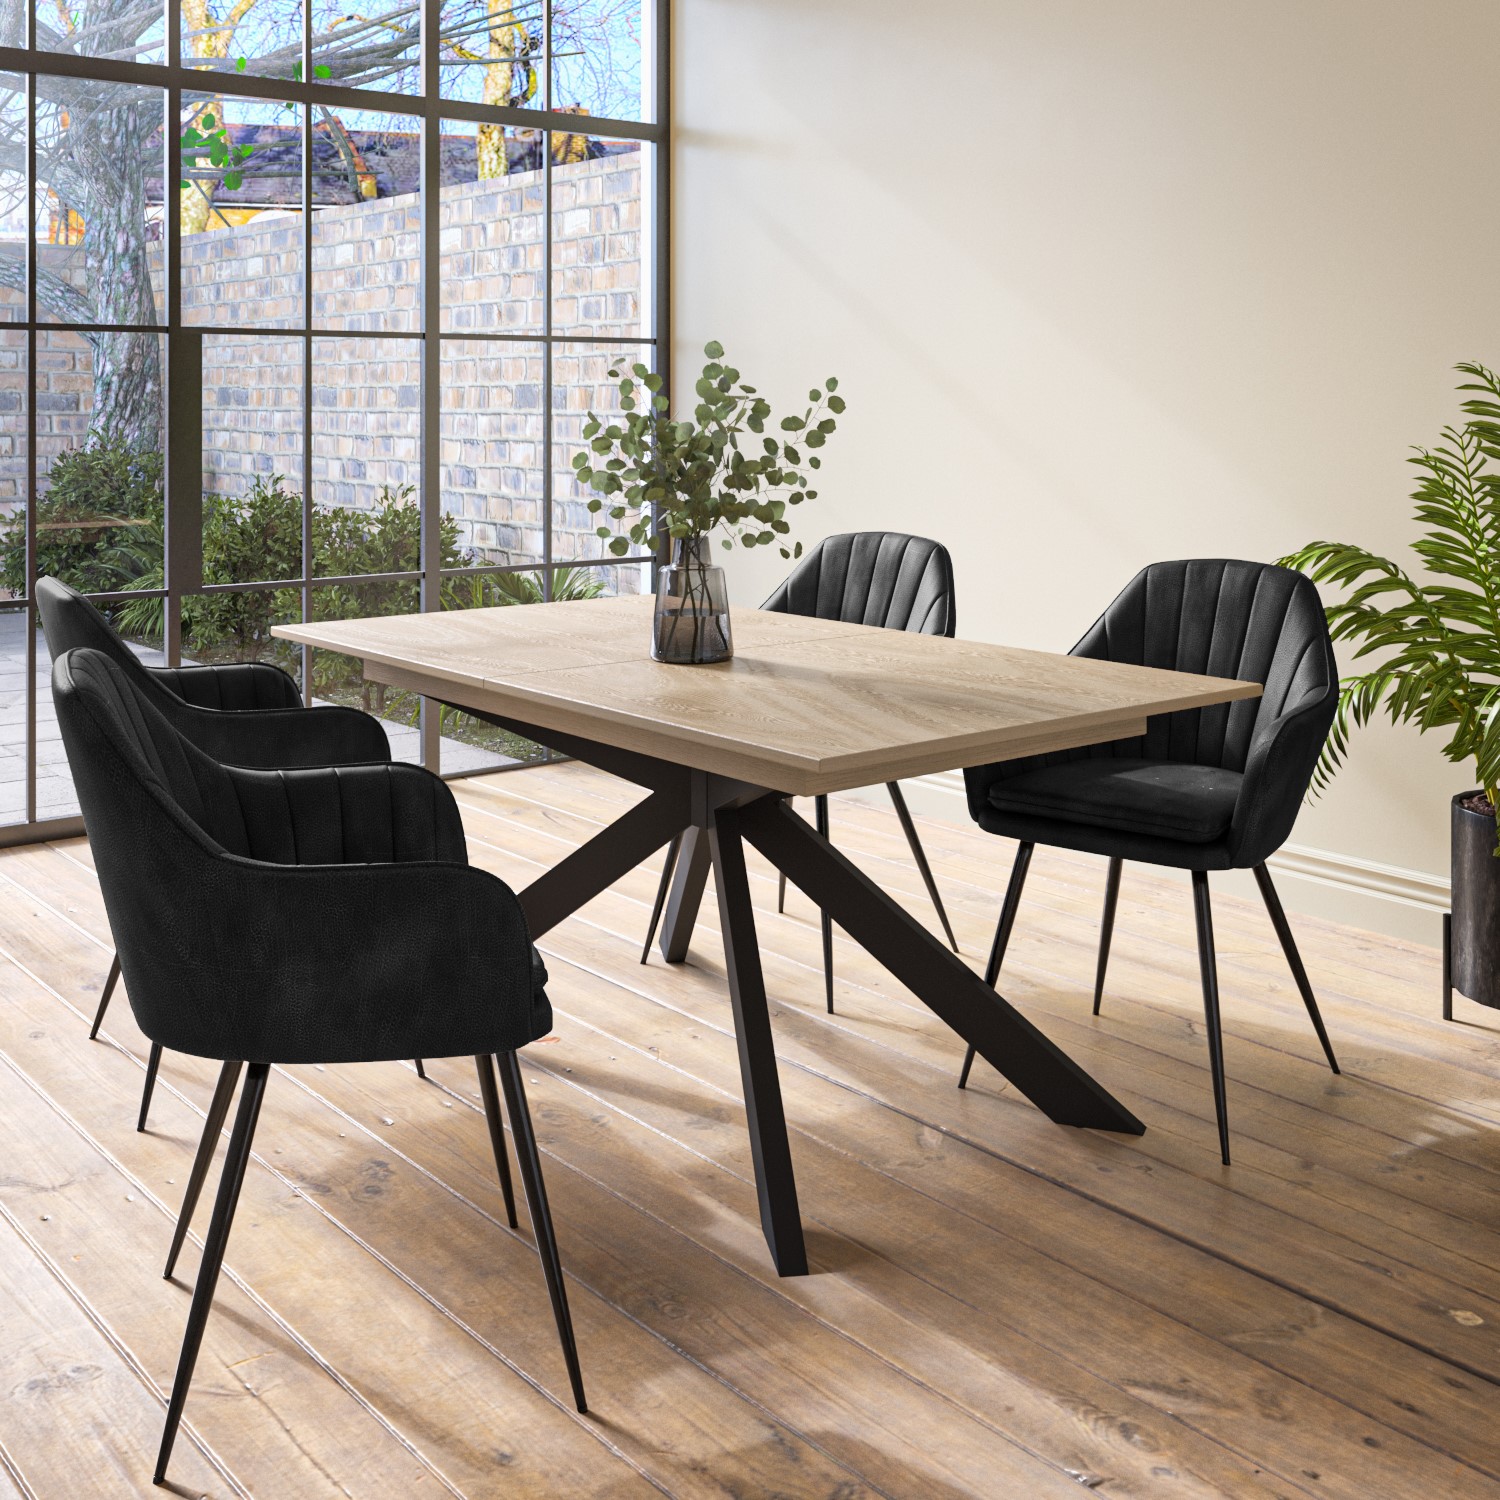 Photo of Extendable oak dining table with 4 black faux leather dining chairs - carson